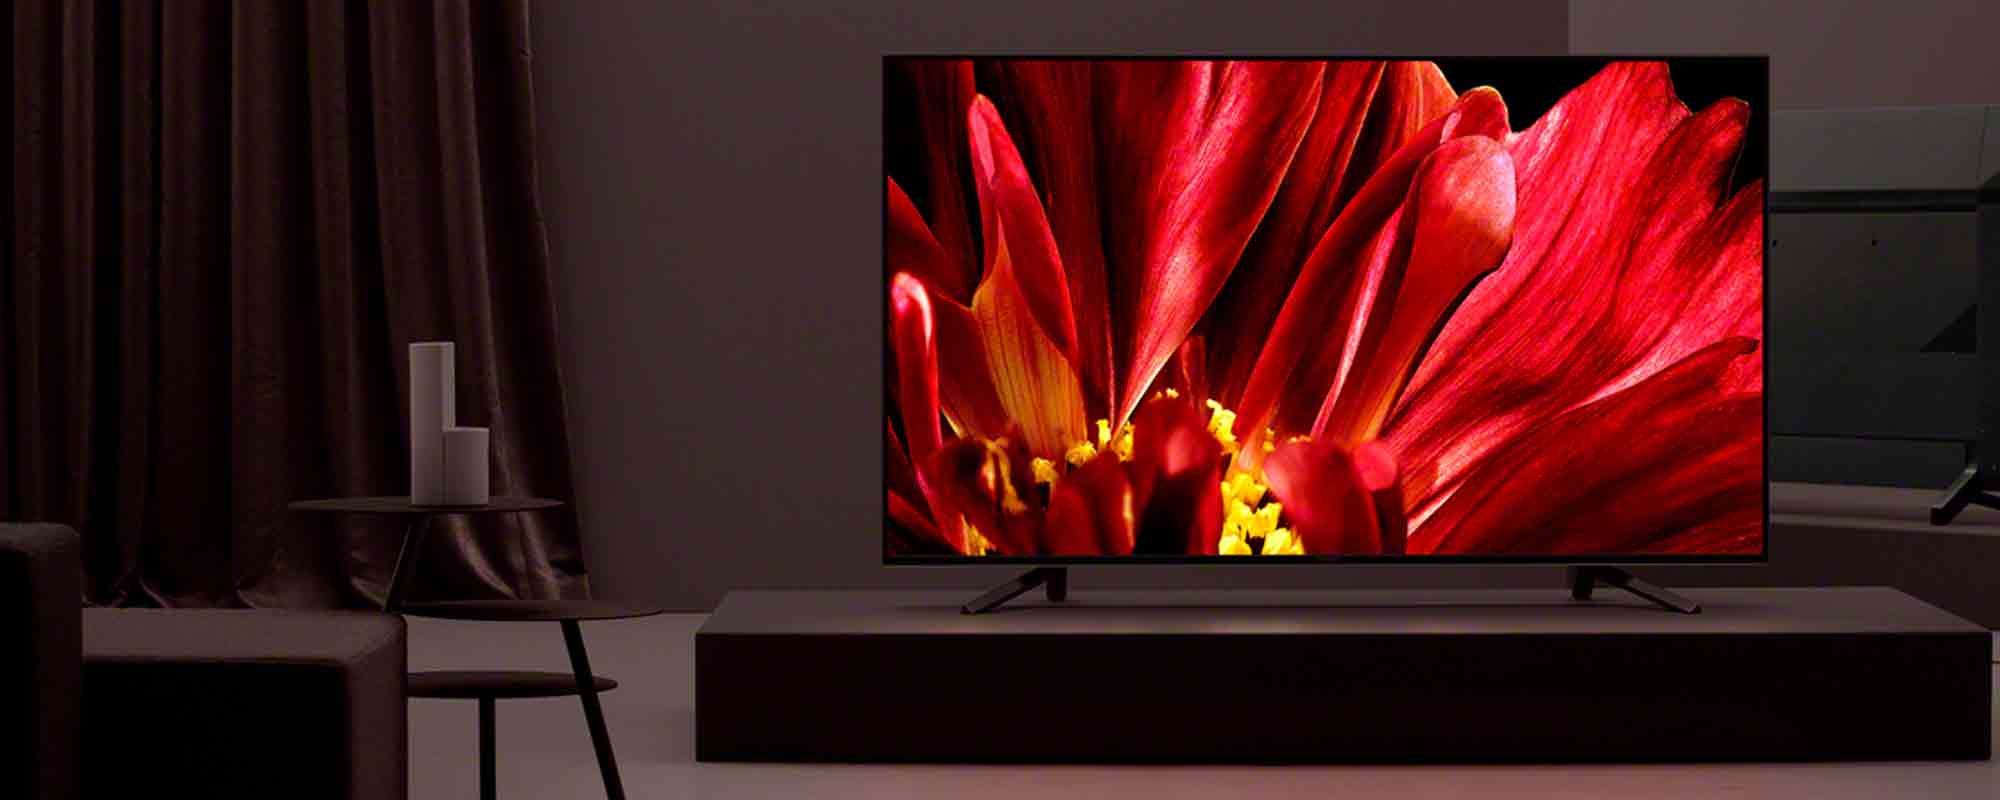 Sony image of vibrant red flower on screen